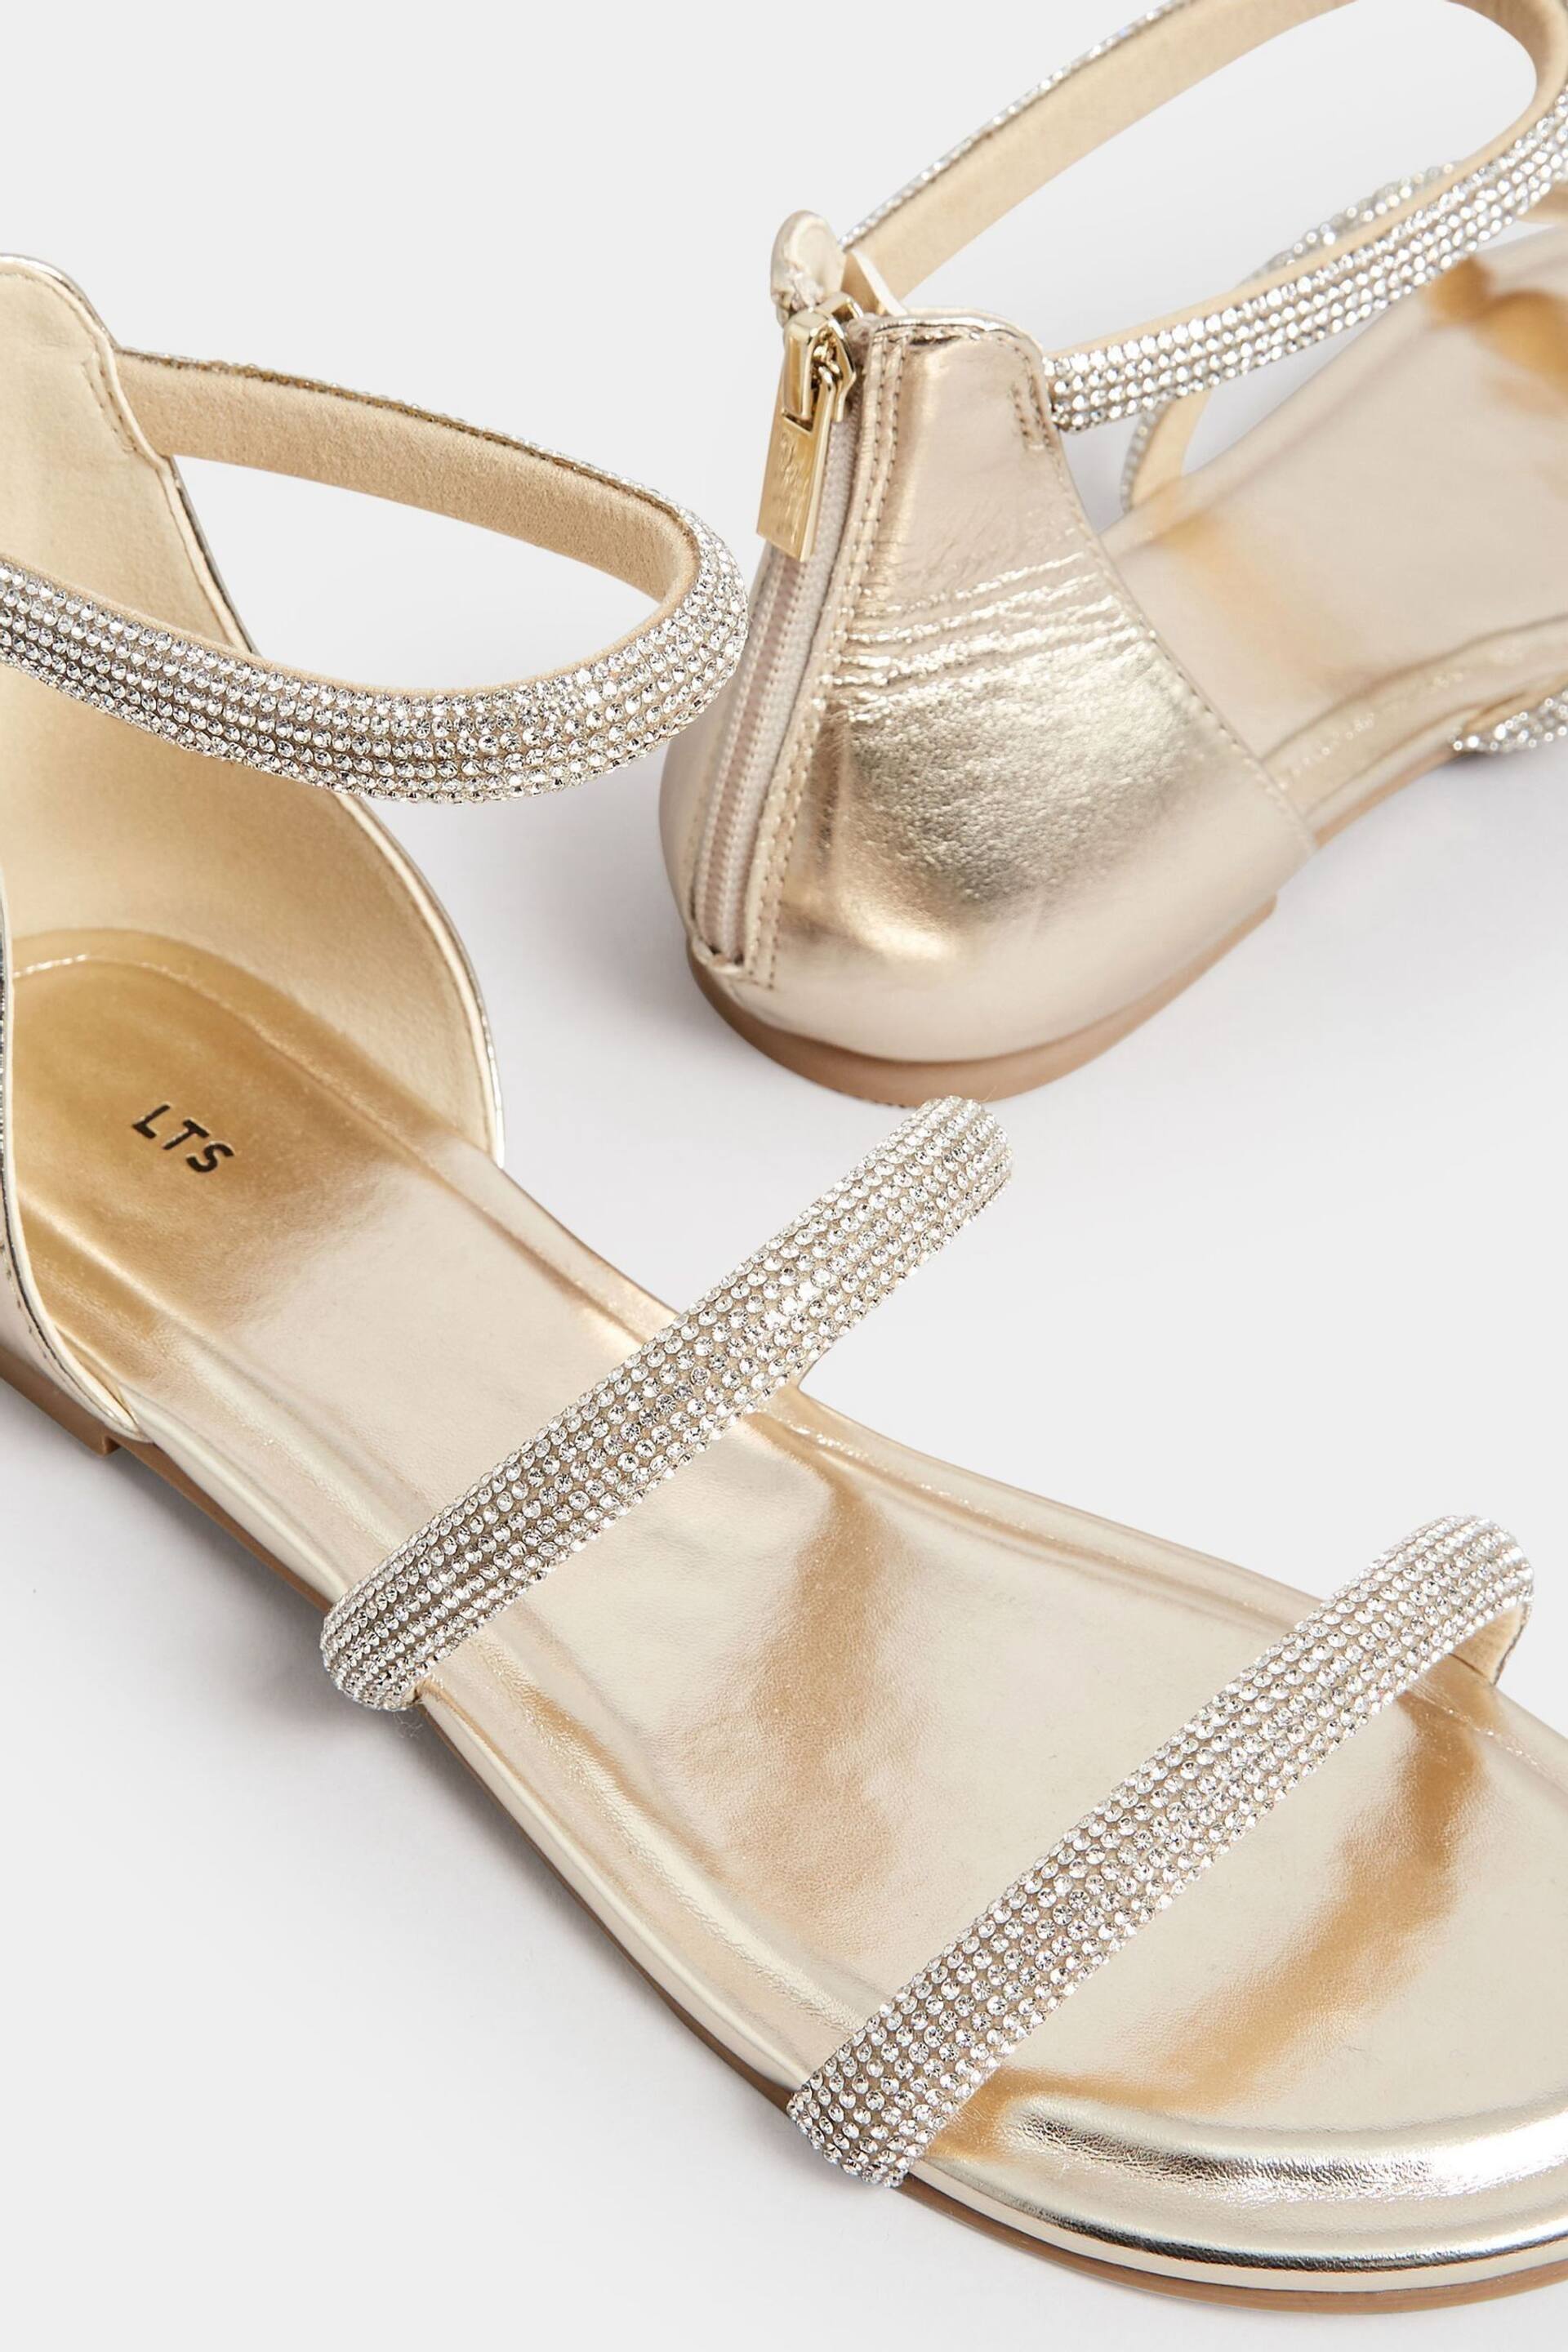 Long Tall Sally Gold Diamante Strap Flat Sandals - Image 4 of 4